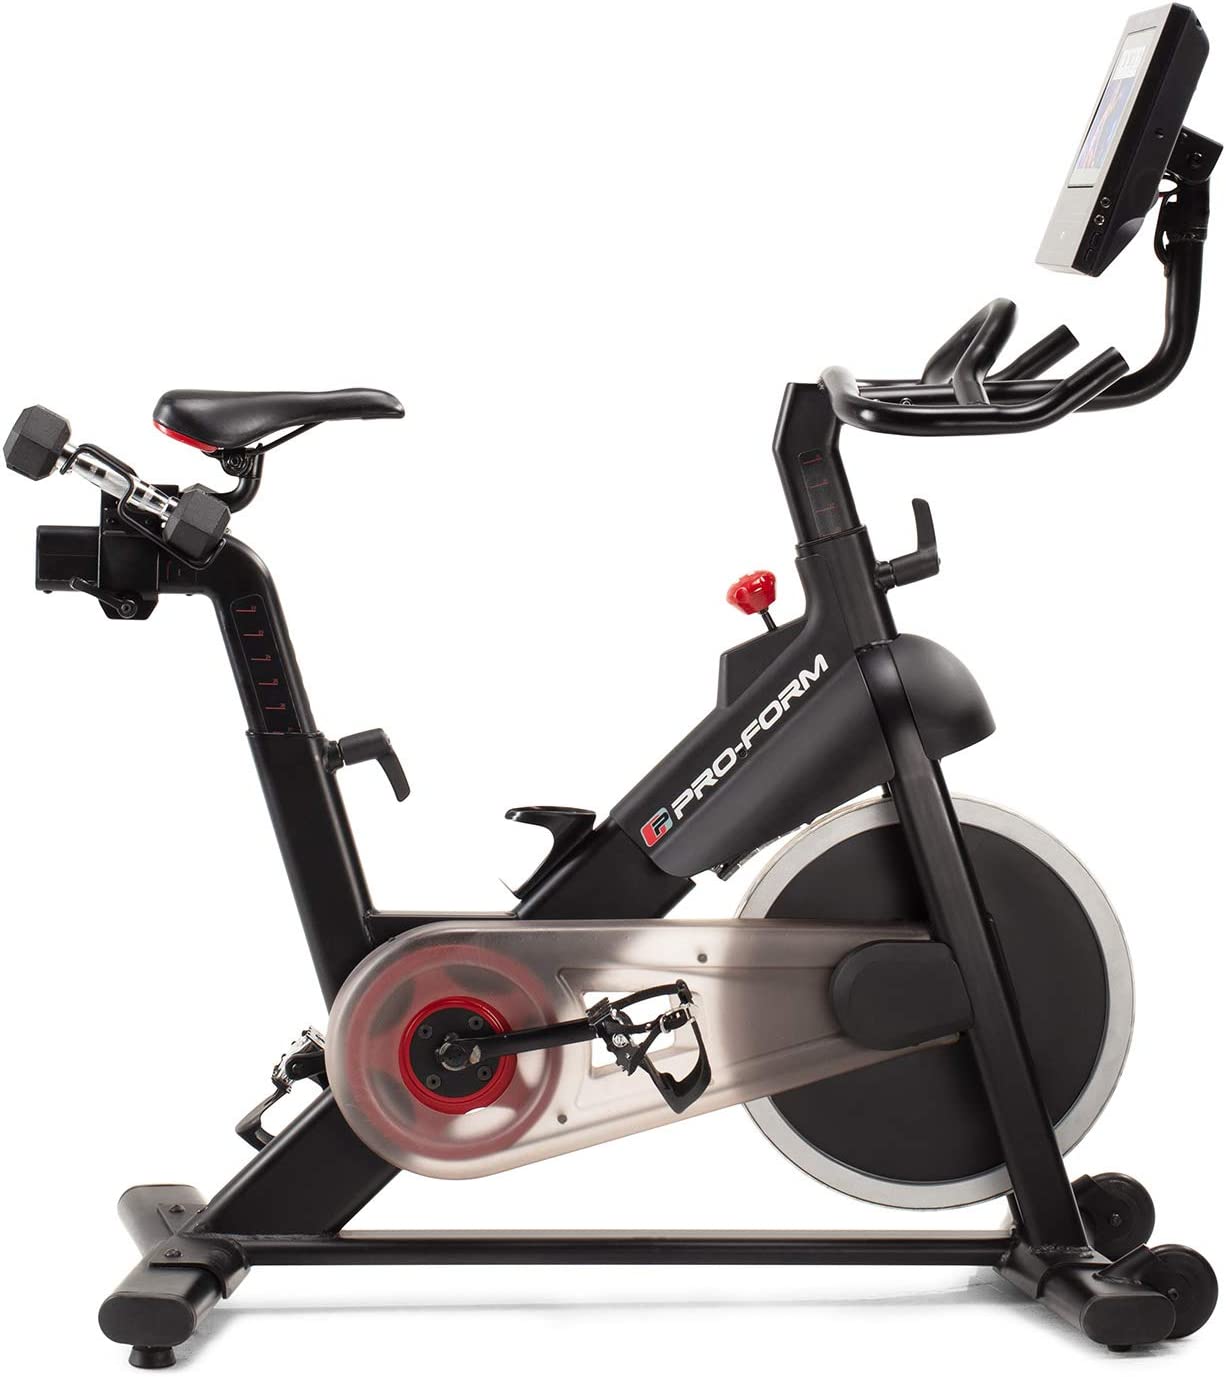 Proform Smart Power 10.0 Exercise Bike - Side view 4